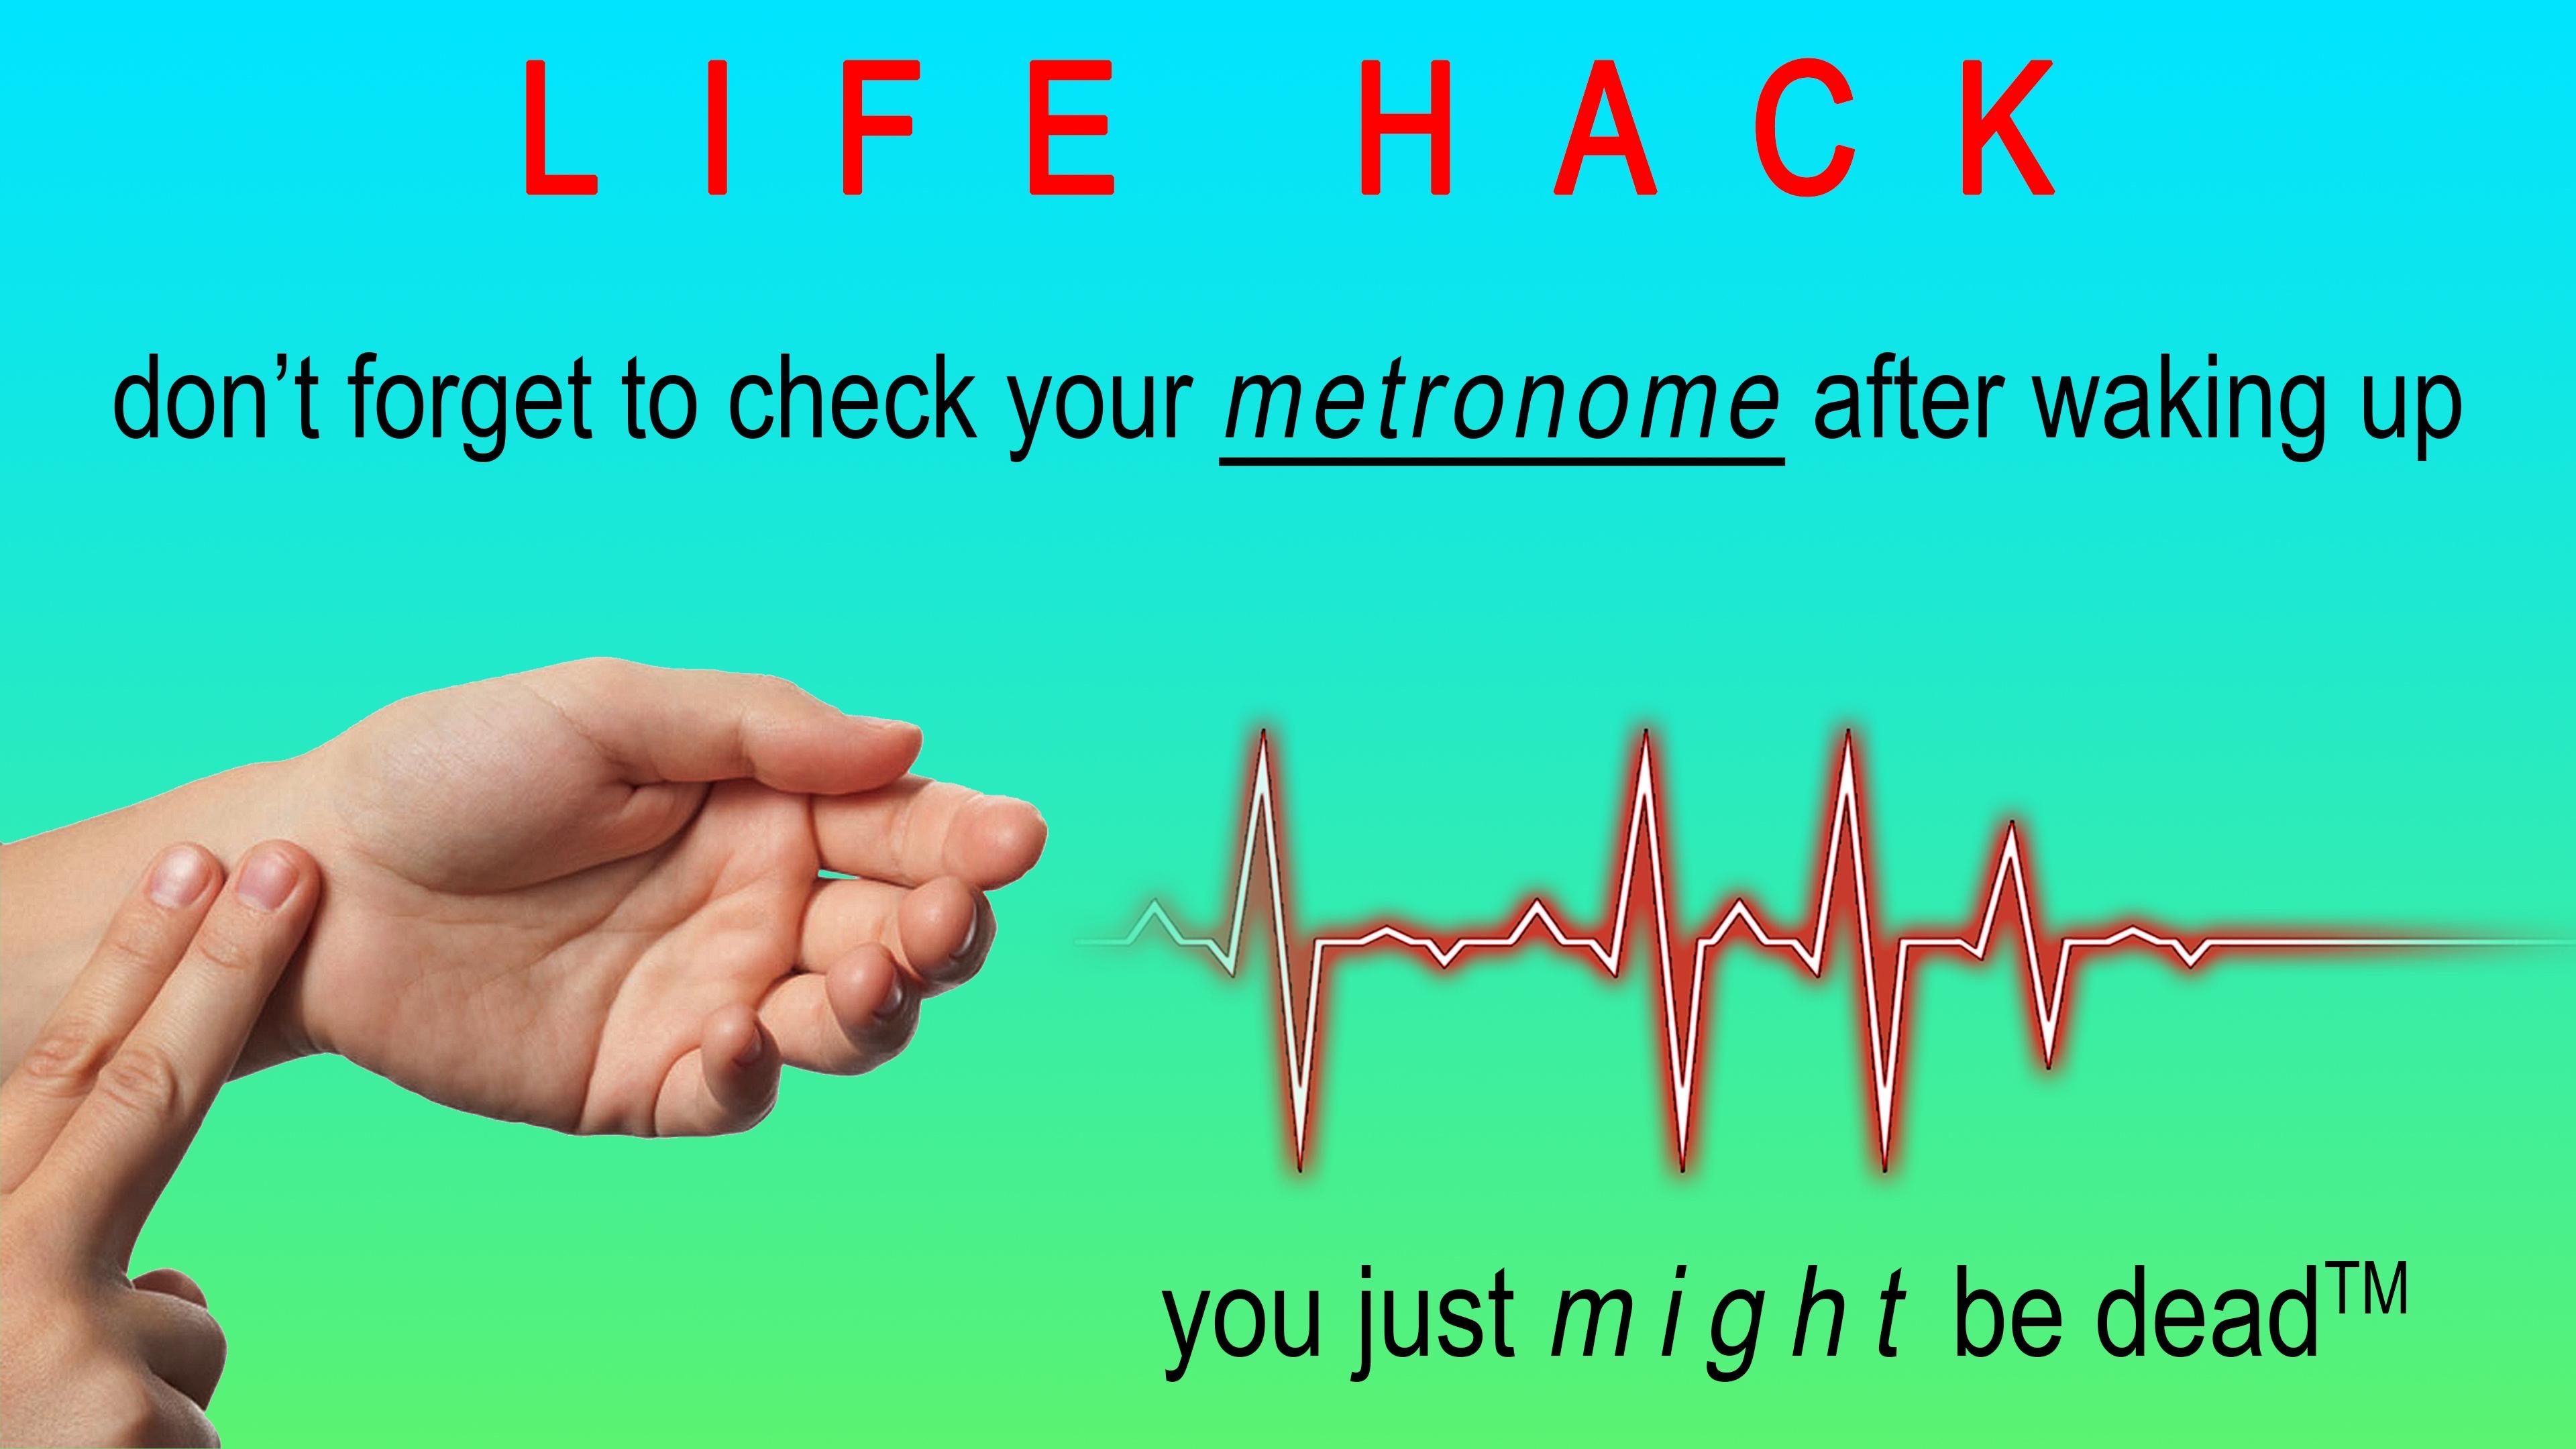 surreal memes - smile - Life Hack don't forget to check your metronome after waking up you just might be deadTM